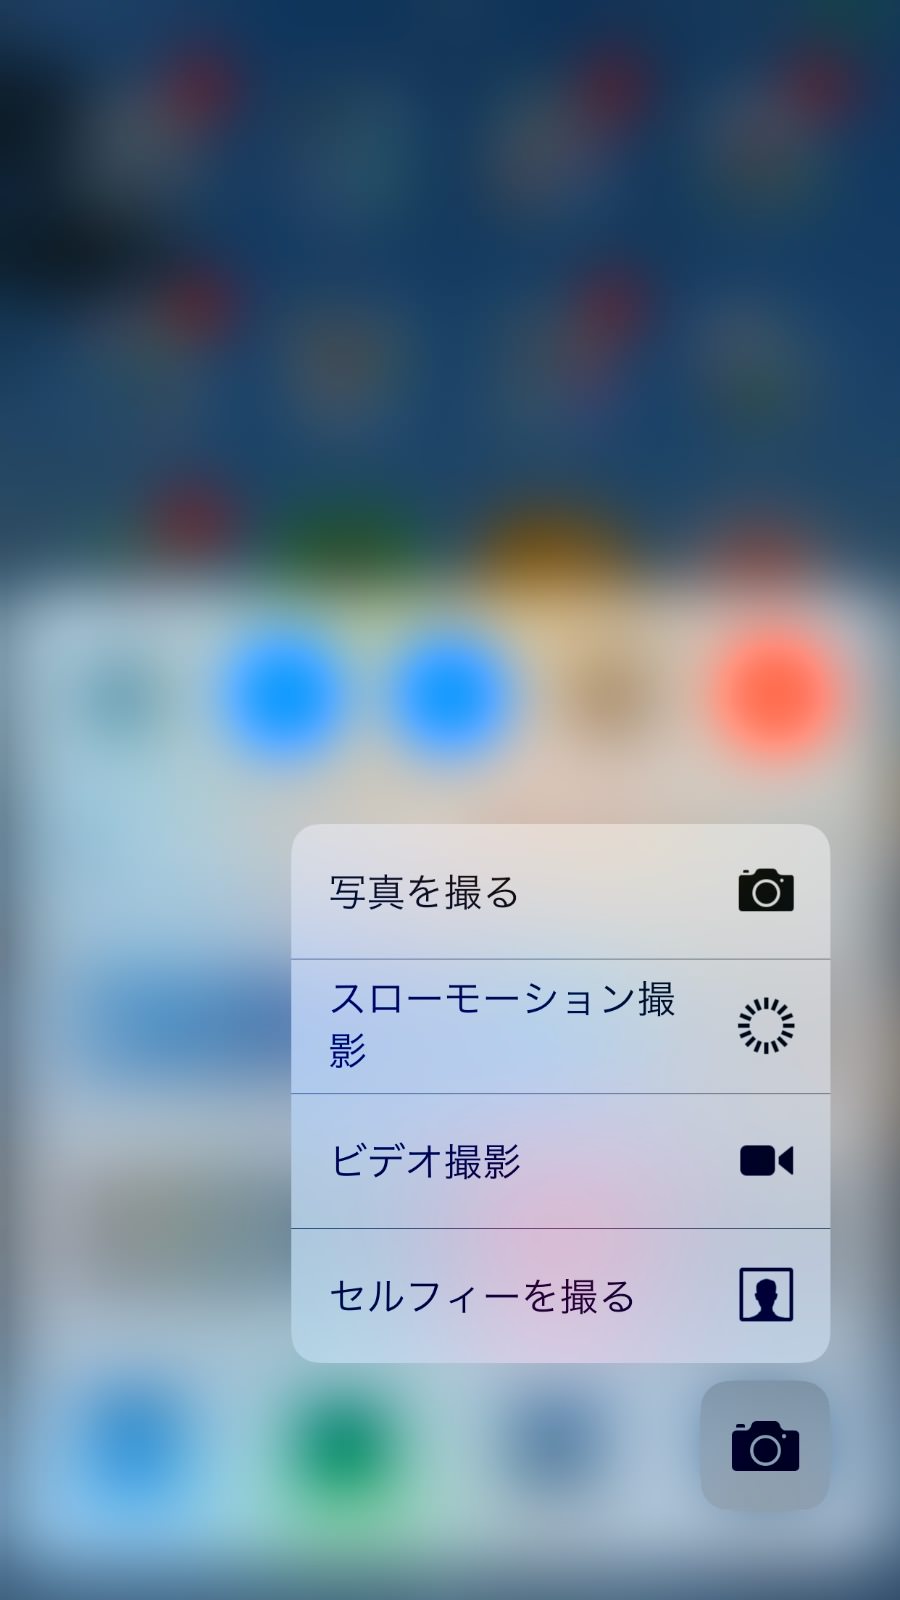 3dtouch control center 5316